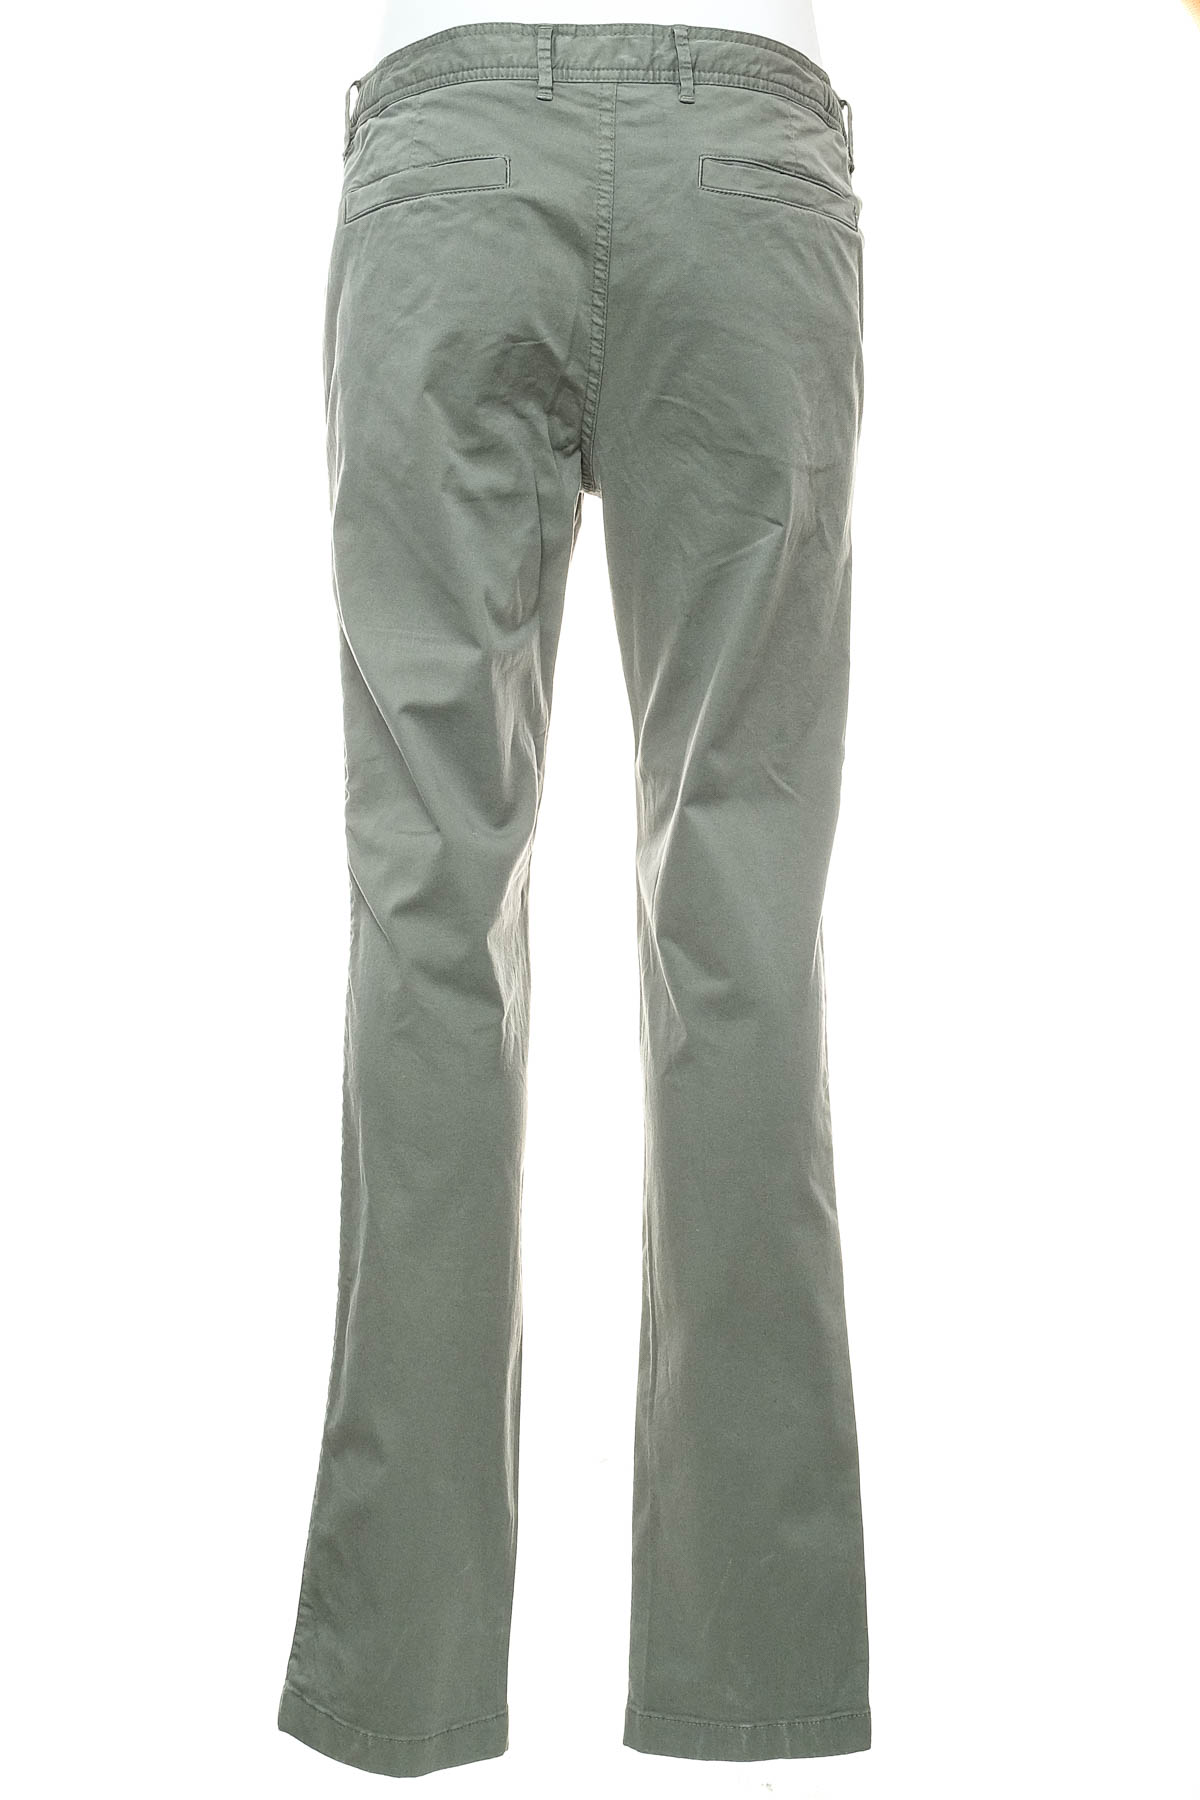 Men's trousers - MR MARVIS - 1